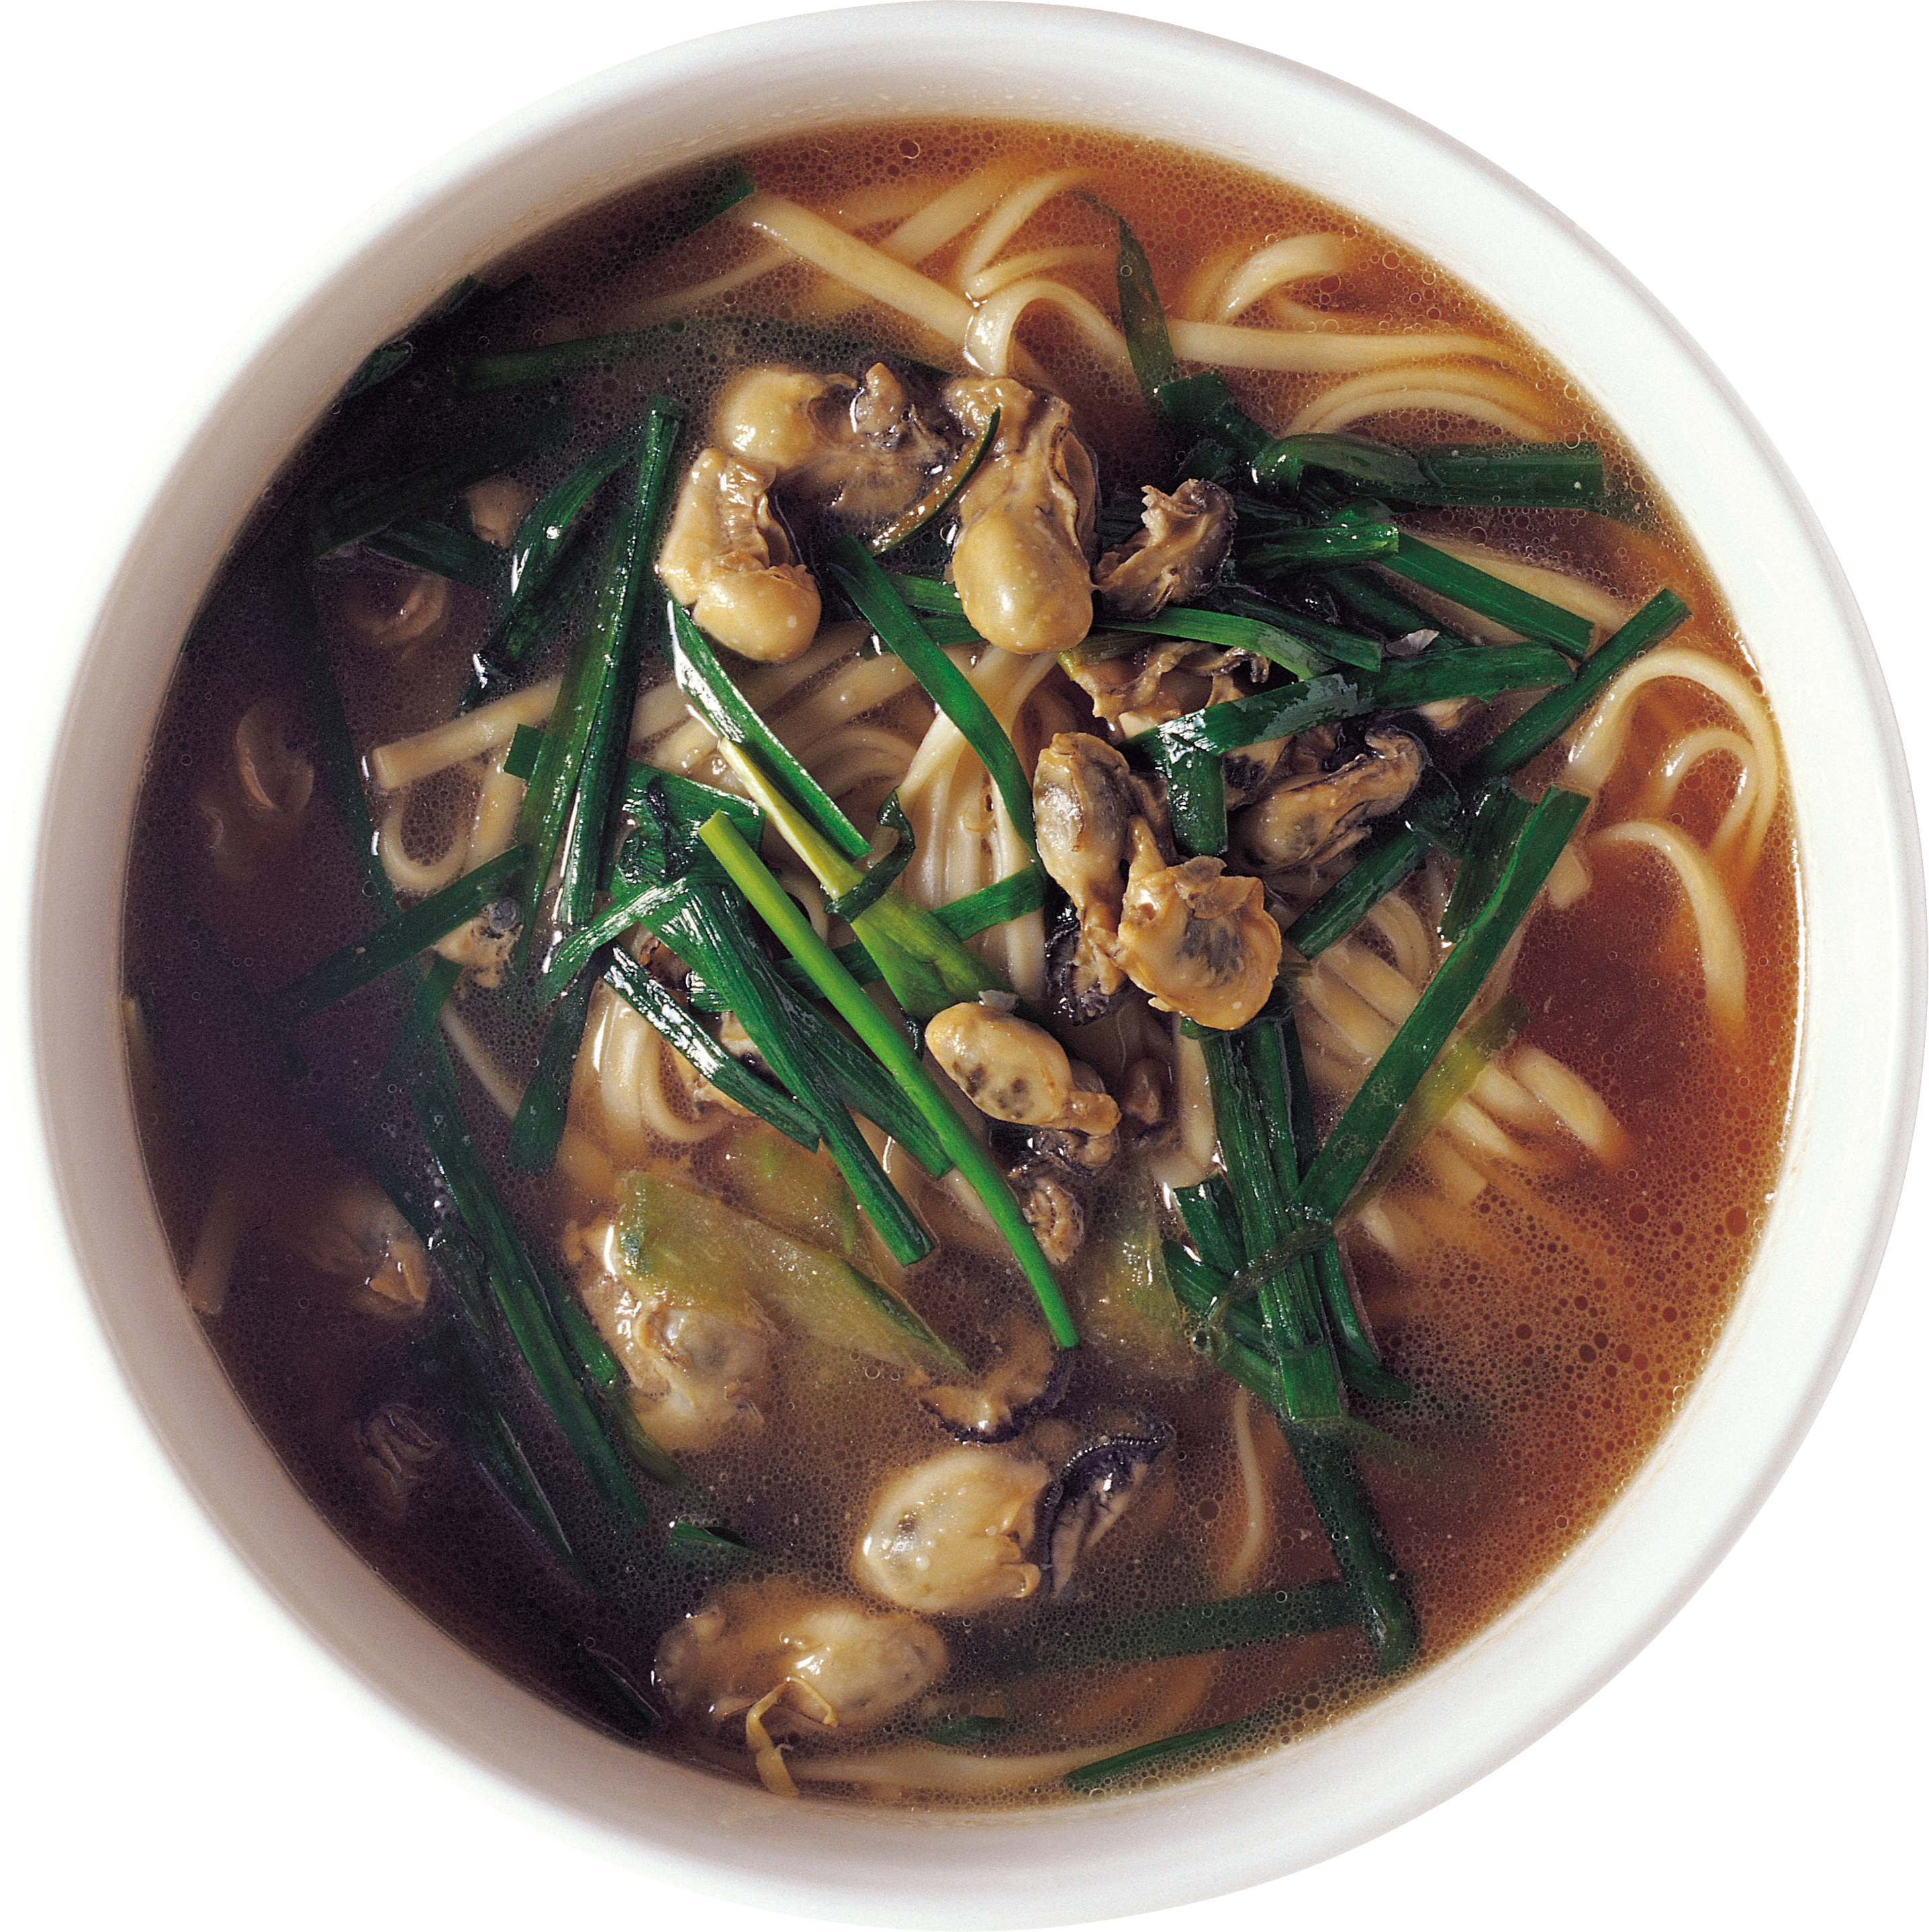 japanese Ramen Soup with noodles and mushrooms